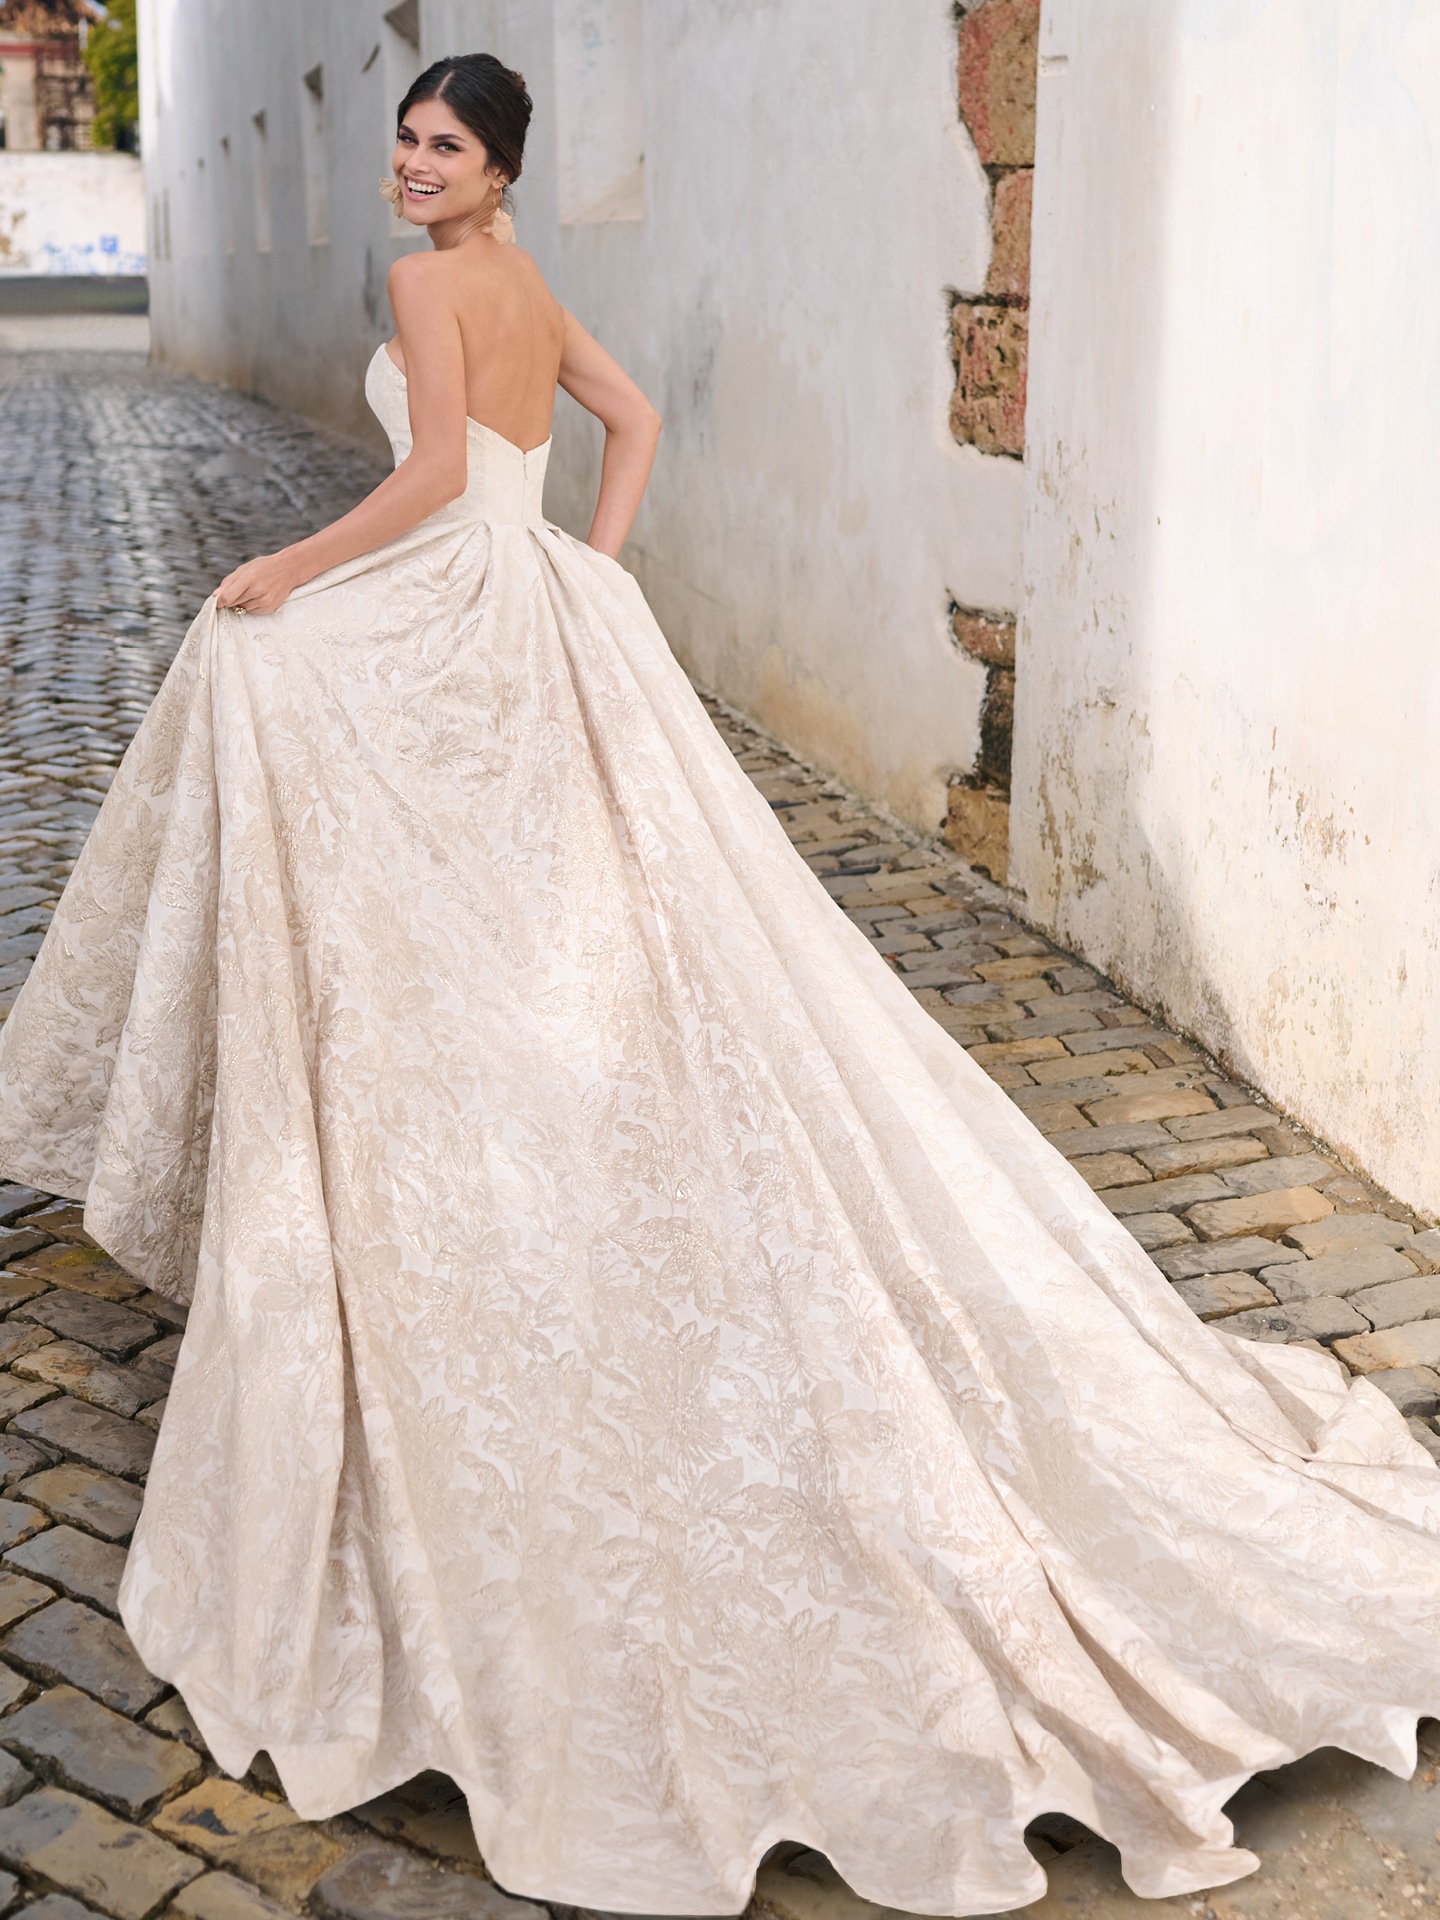 Bridal Gowns  Buy Bridal Gowns Online Starting at Just 419  Meesho